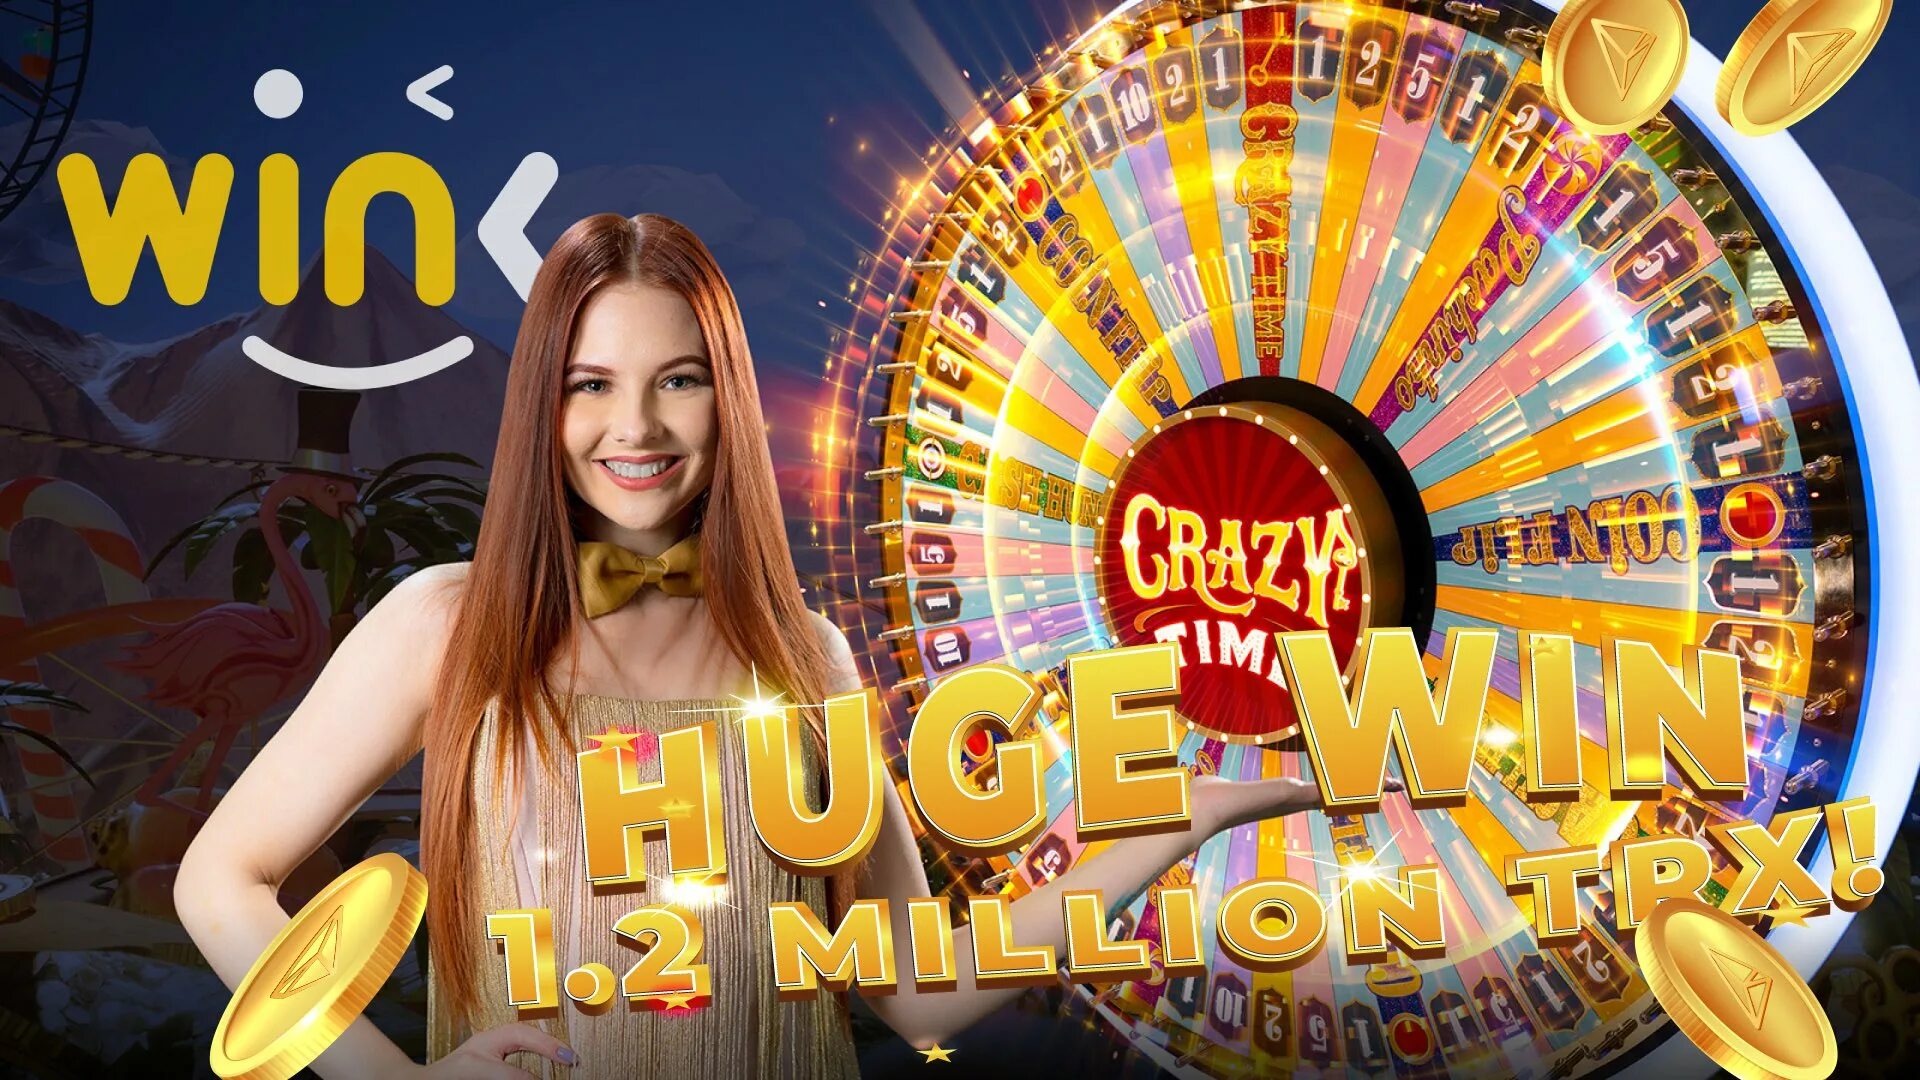 Crazy time 1win crazytime game info. Crazy time Casino. Crazy time big win. Crazy time Wheel. 1 Win Crazy time.